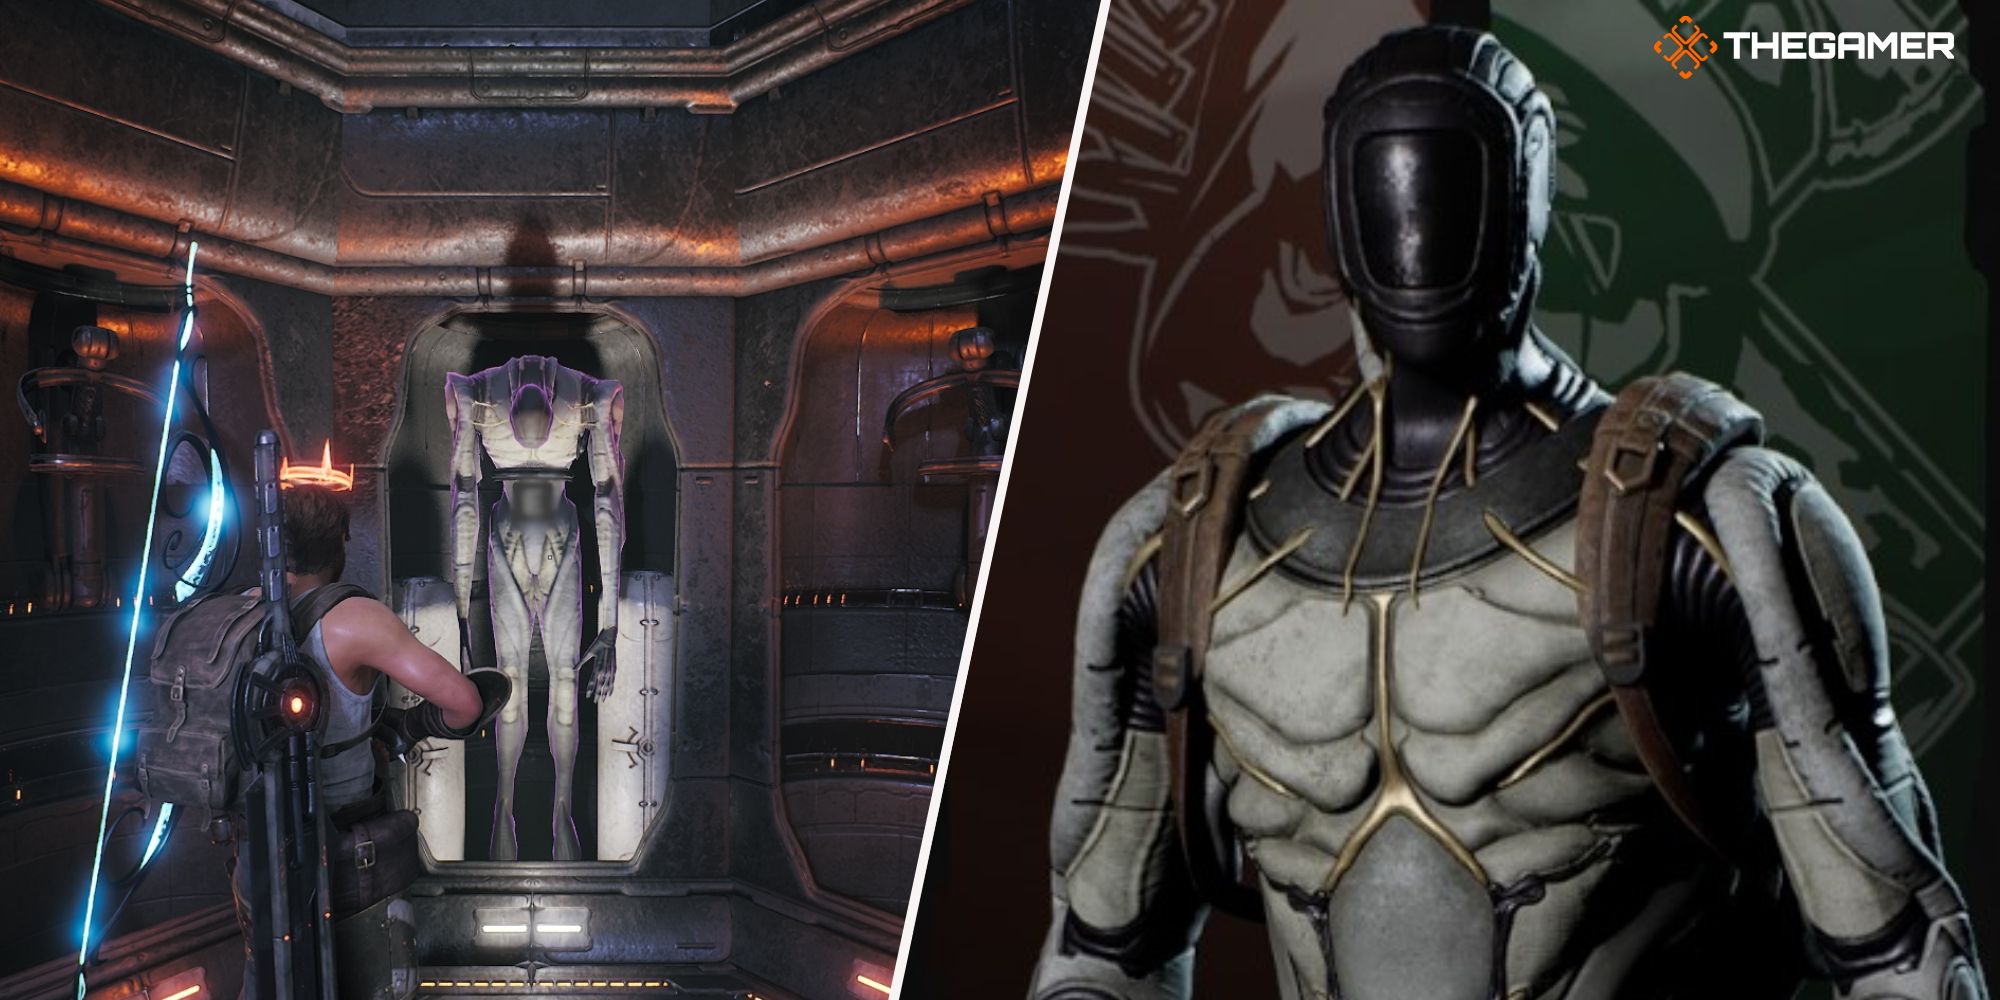 A collage image of a character aiming at an automaton, and the Space Worker Armor Set in Remnant 2.